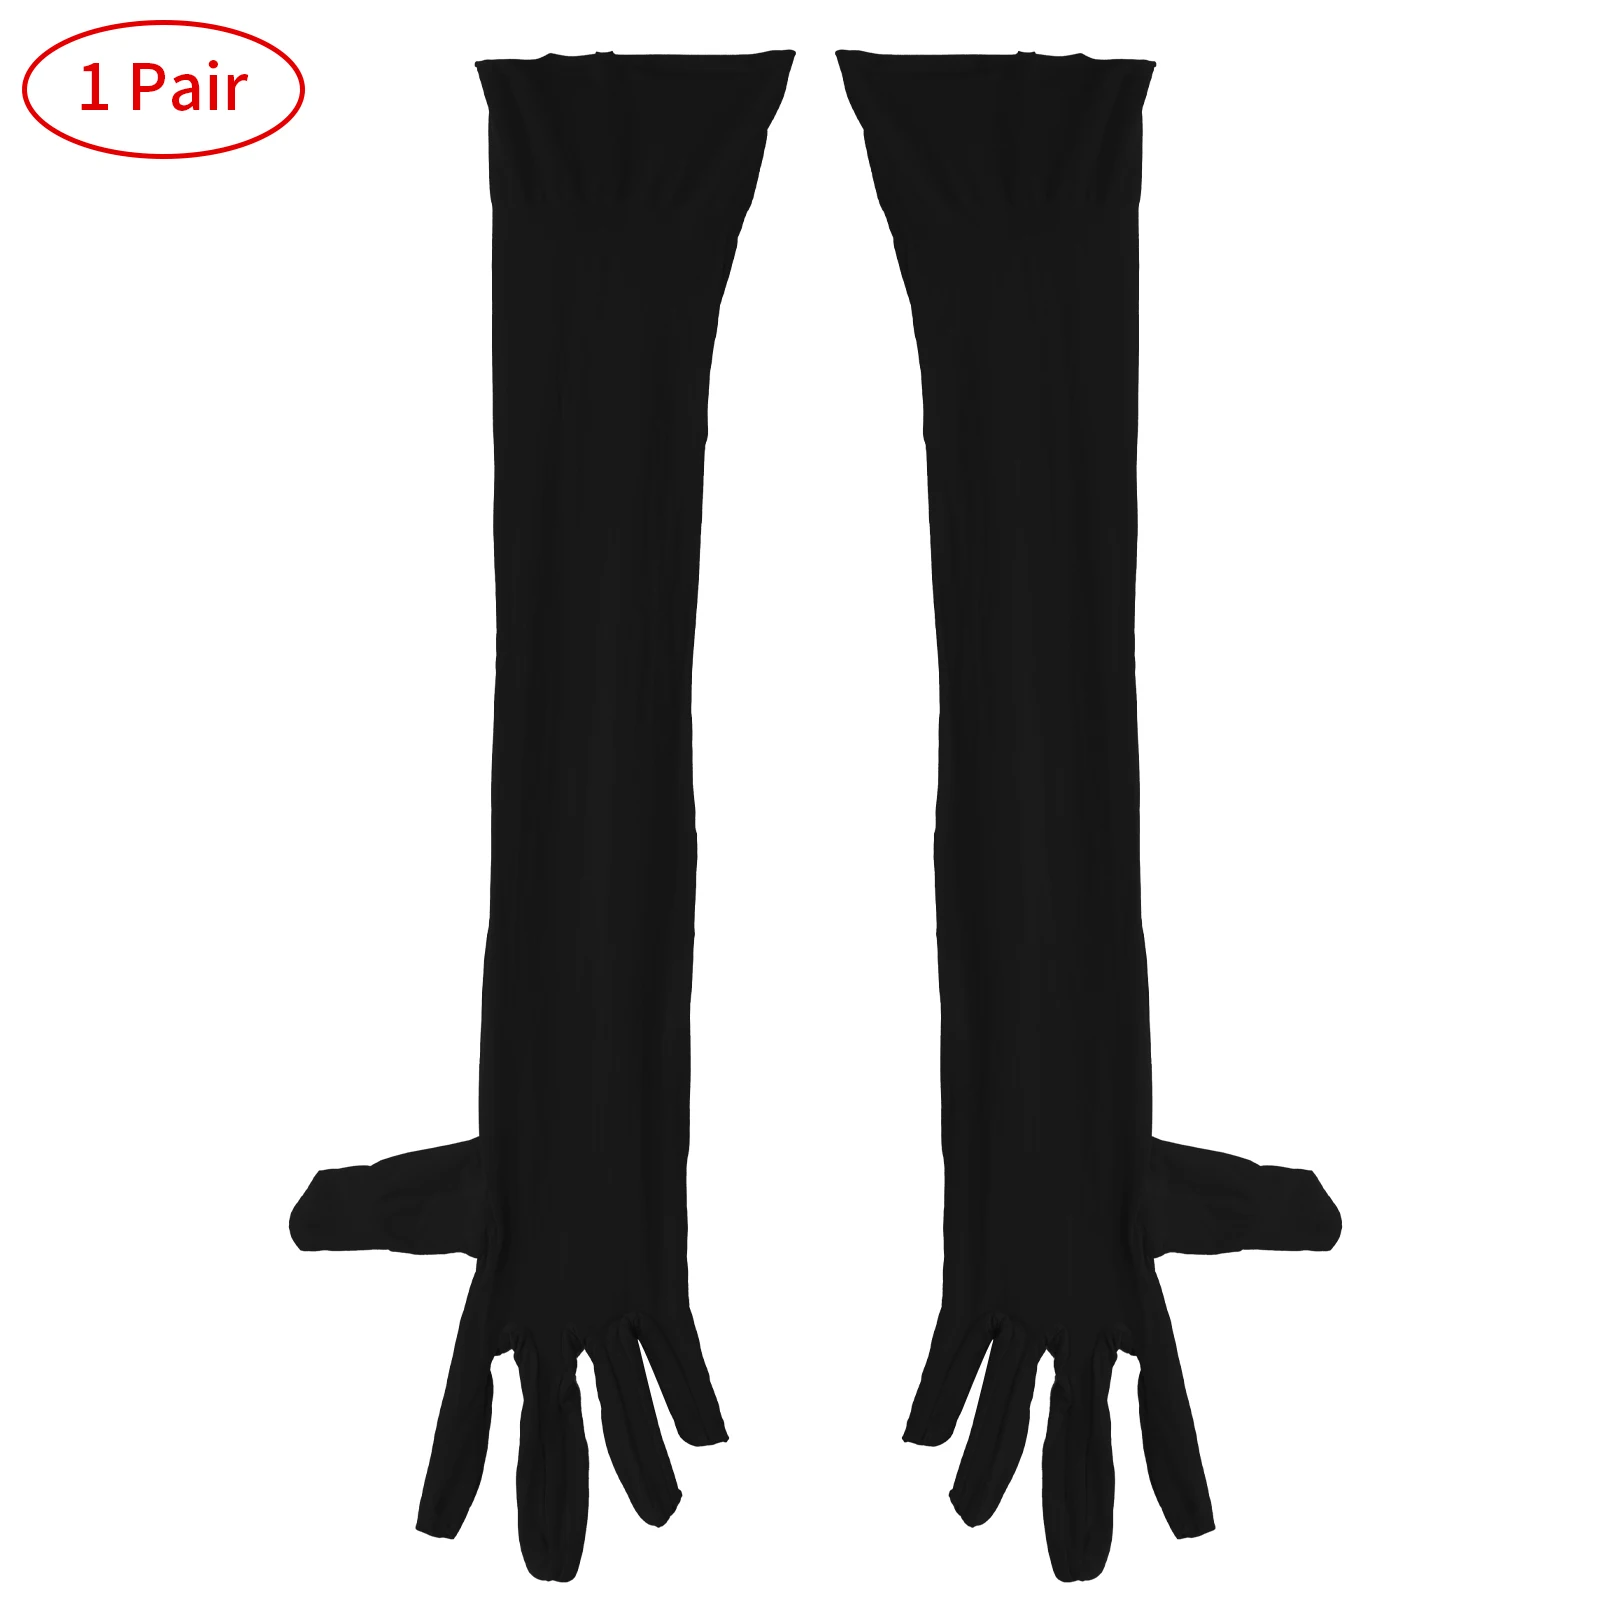 Fashion Men Adult Glossy Elastic Breatbable Stretchy Soft Arm Length Gloves Role Play Party Club Stage Show Costume Accessories